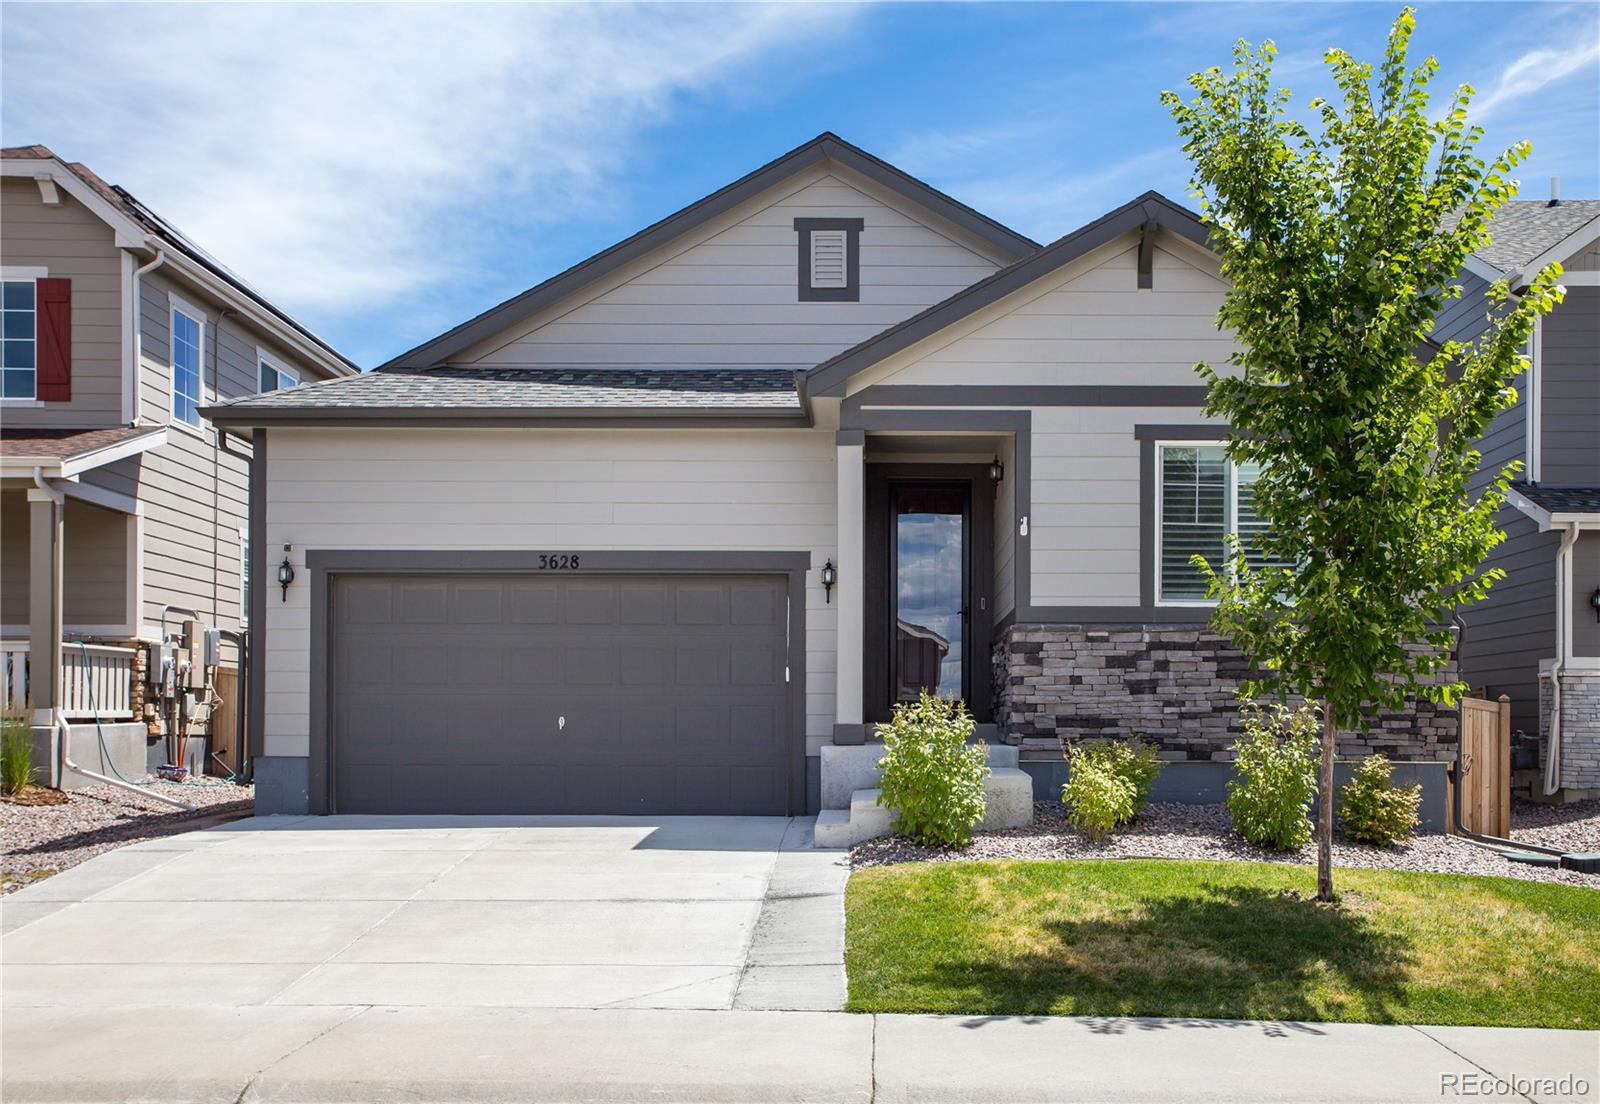 Report Image for 3628  White Rose Loop,Castle Rock, Colorado